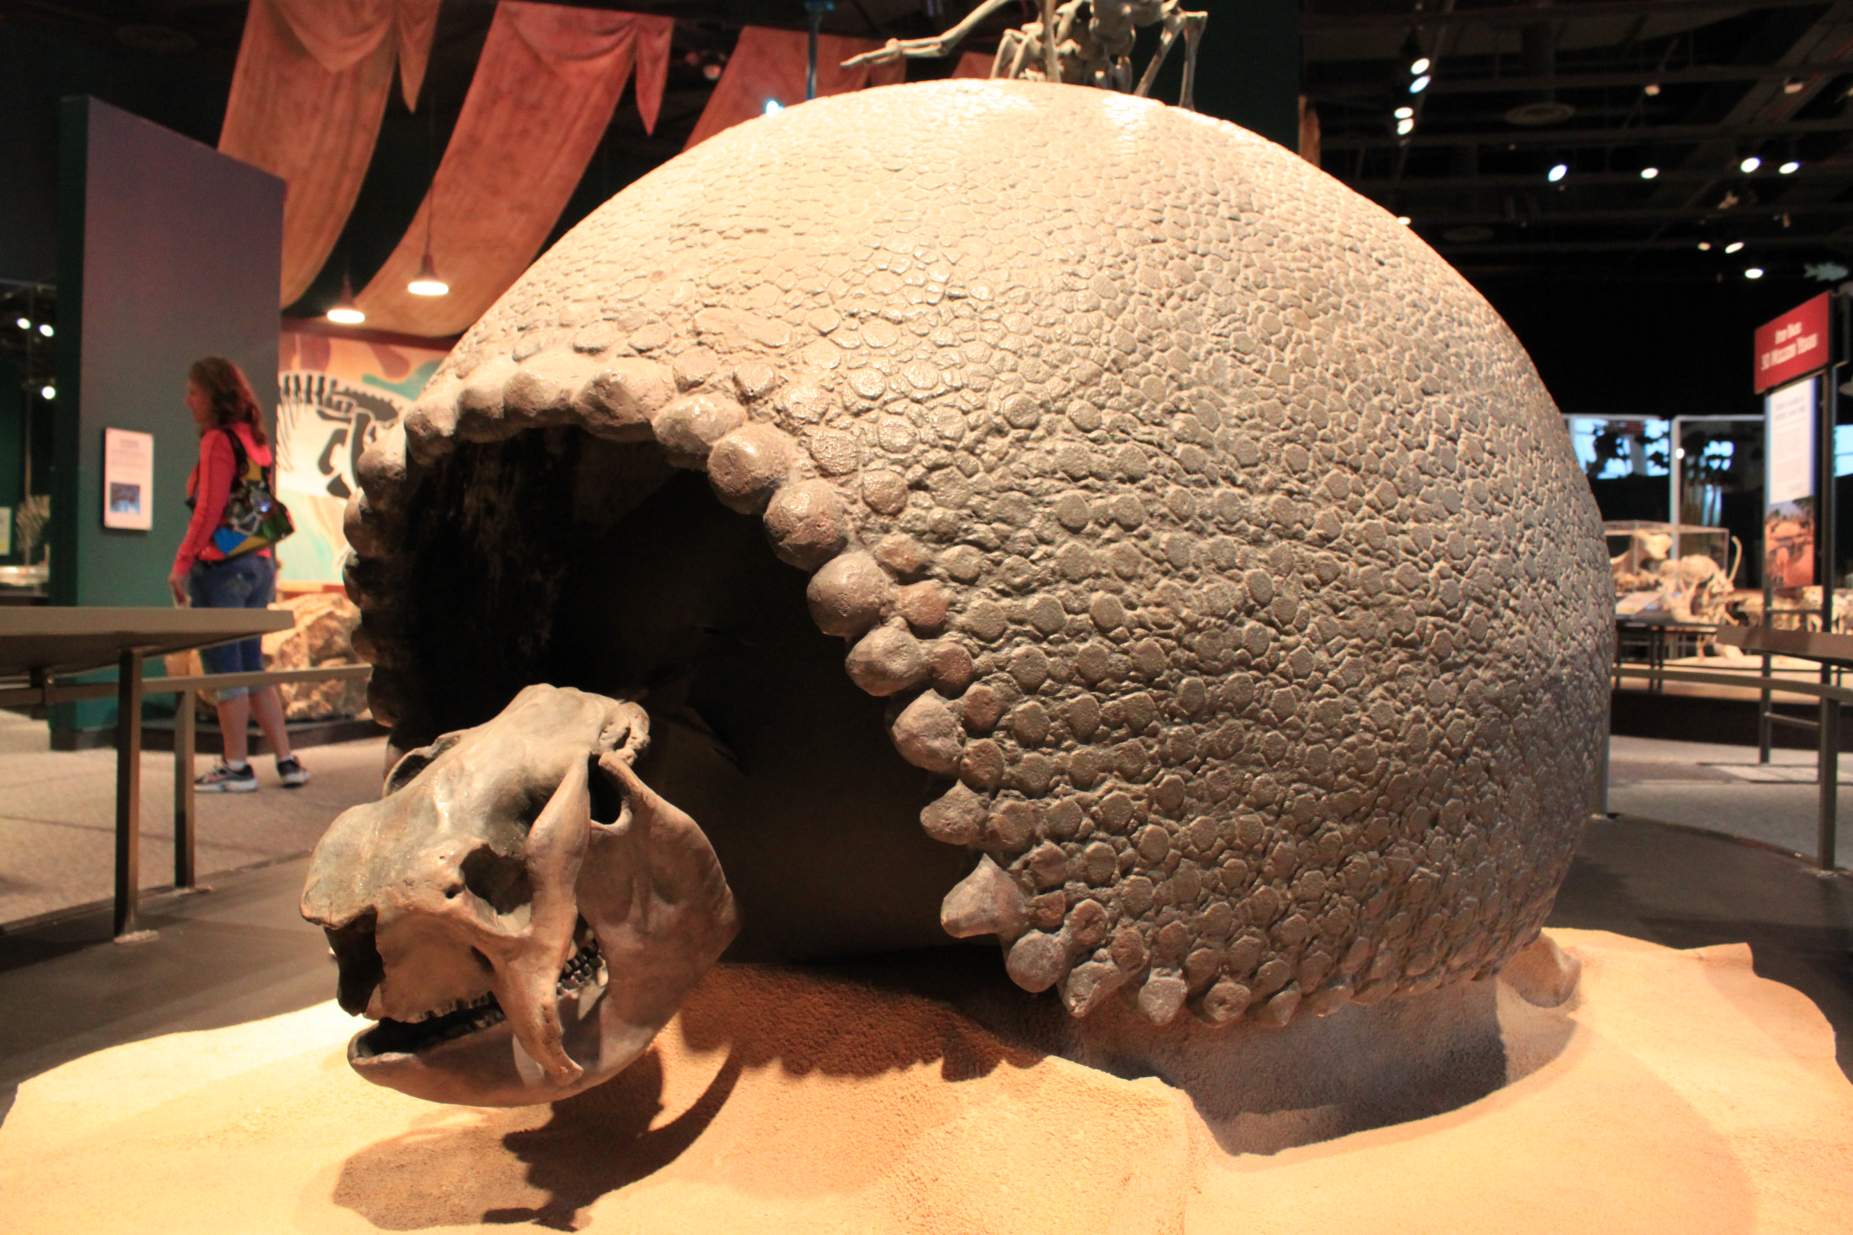 Early American humans used to hunt giant armadillos and live inside their shells 2